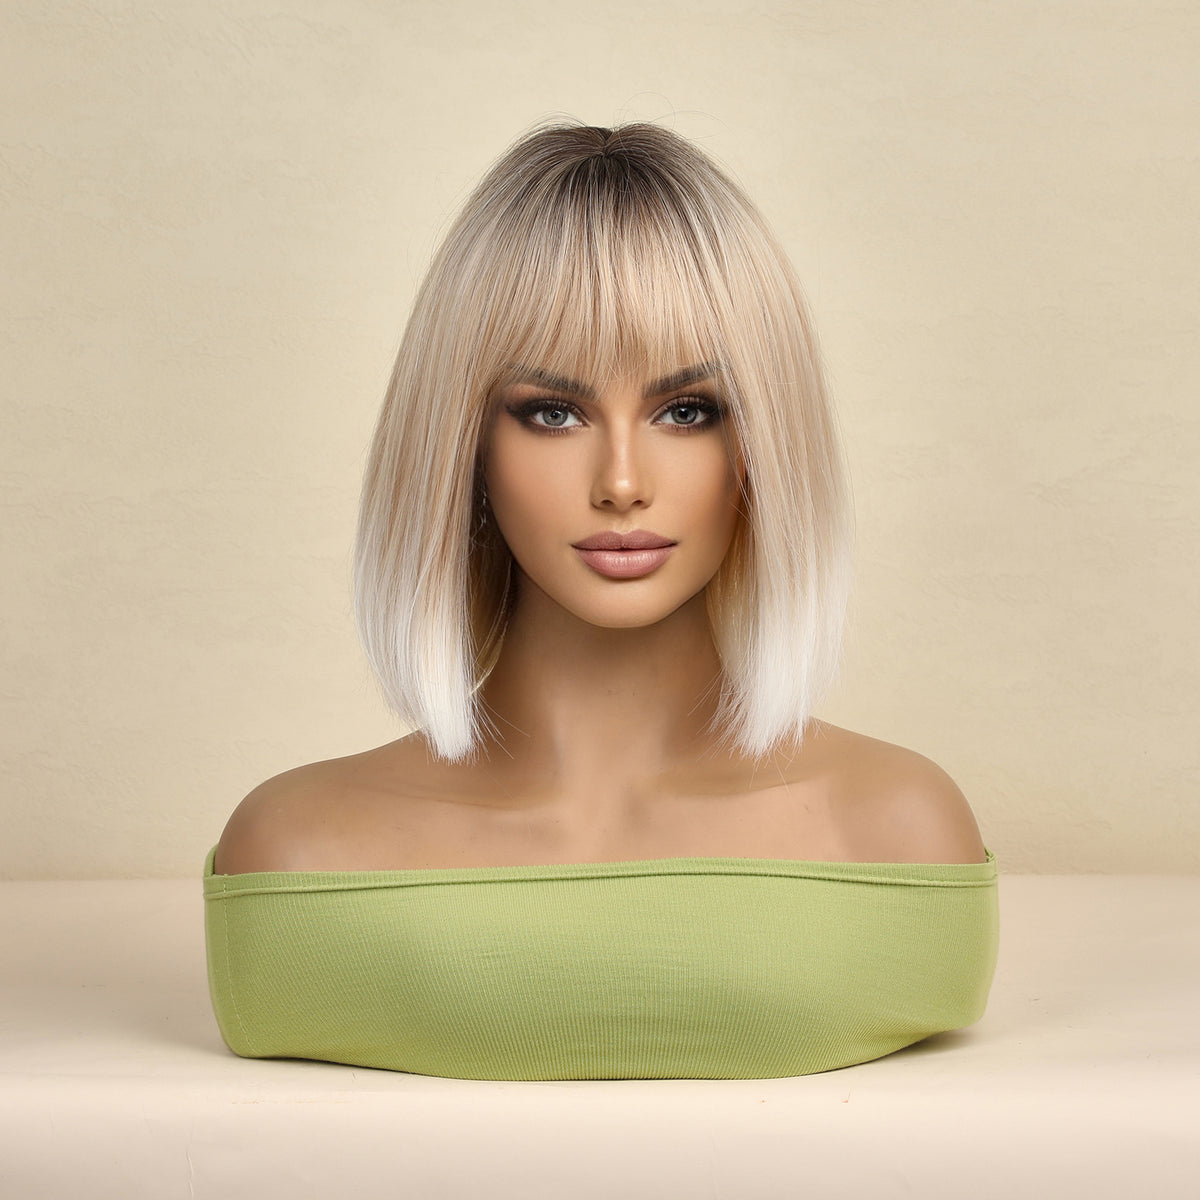 Haircube 12 Inch Short Ombre Platinum Gold Bob Wig with Bang Heat Resistant Synthetic Wig for Women Natural Comfortable Fashion Party Diy Daily  lc8079